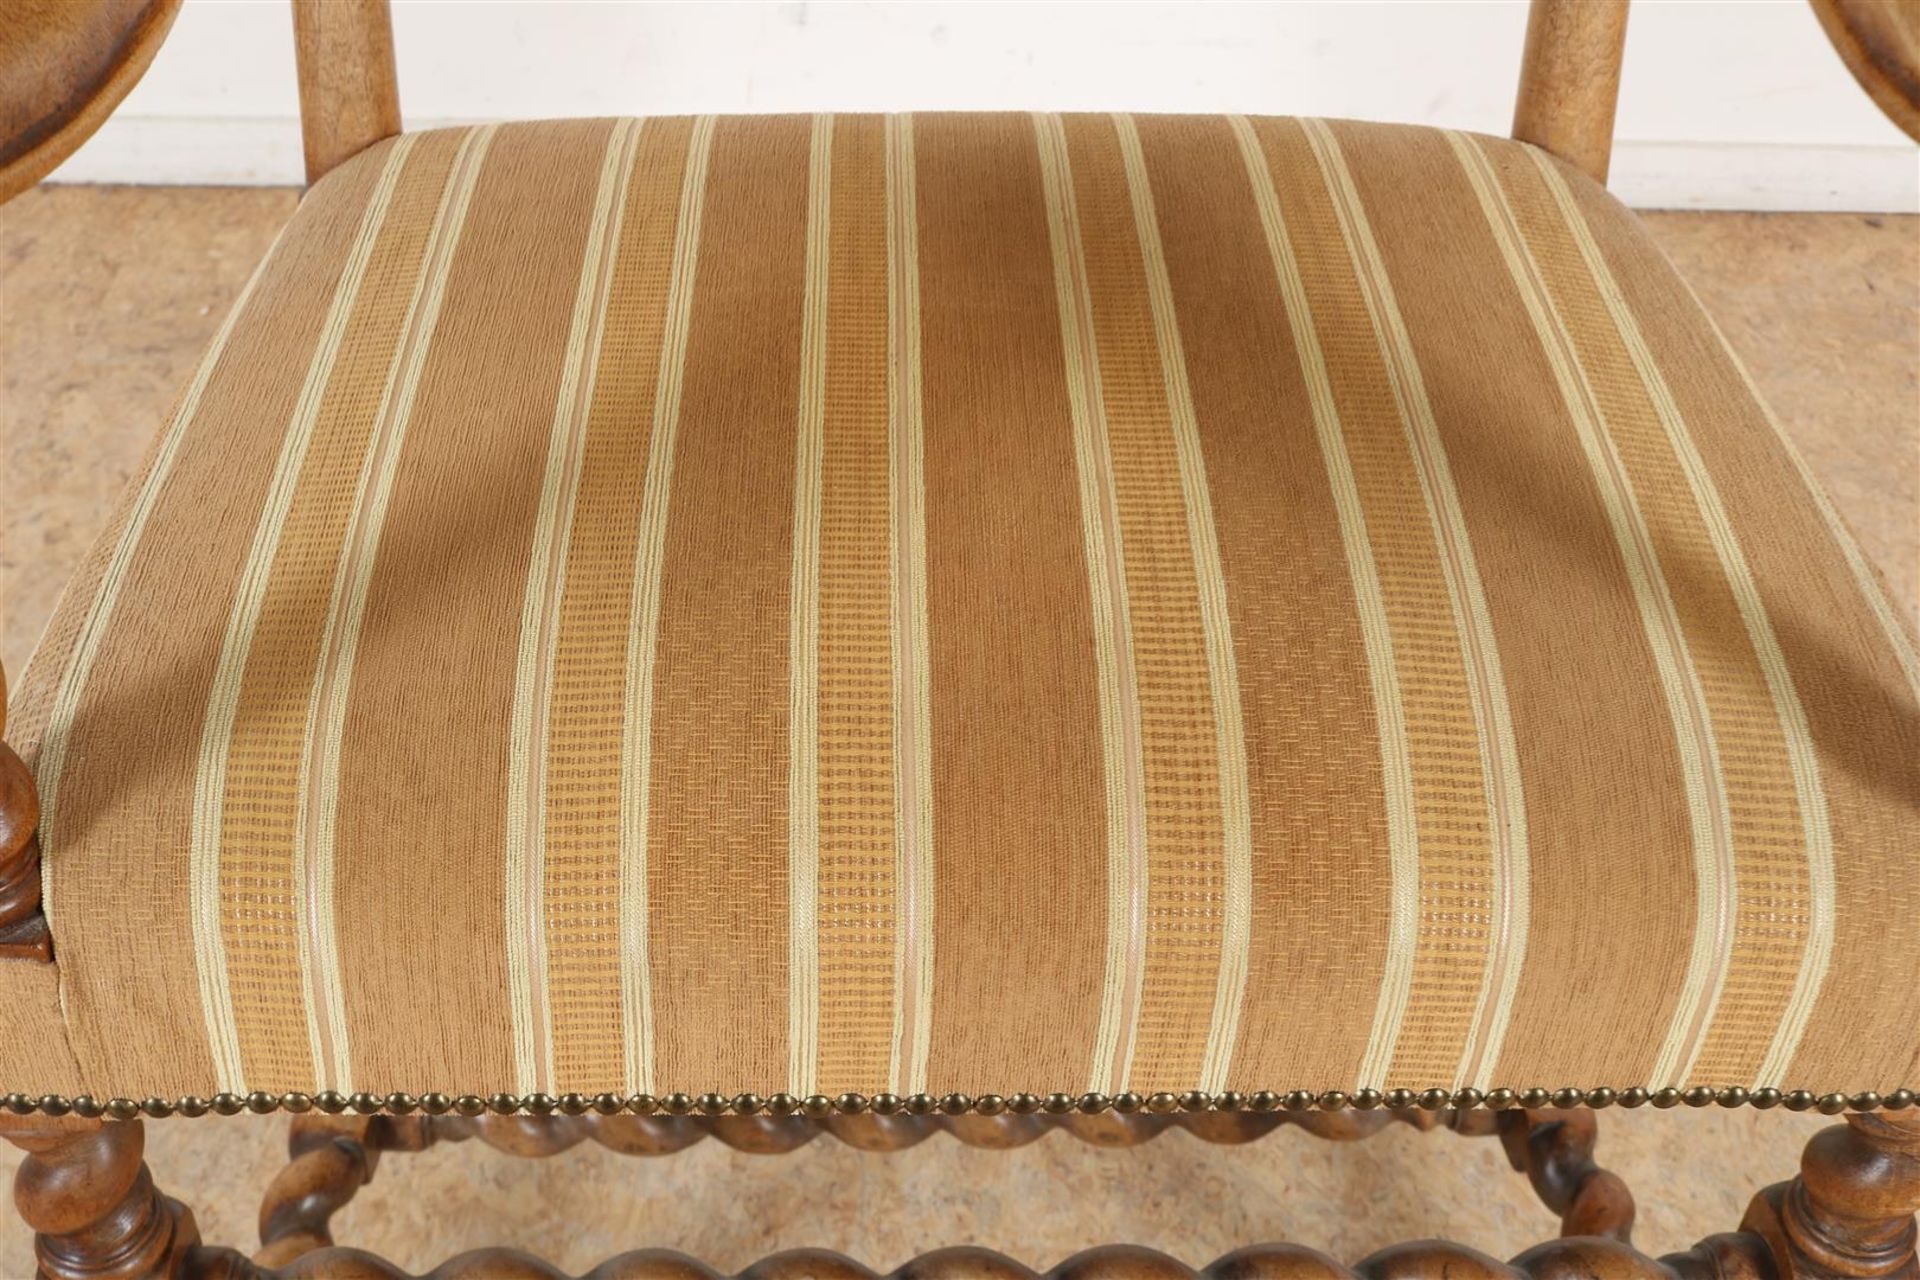 Walnut armchair with striped upholstery and carved acanthus leaves on the armrest. - Image 4 of 5